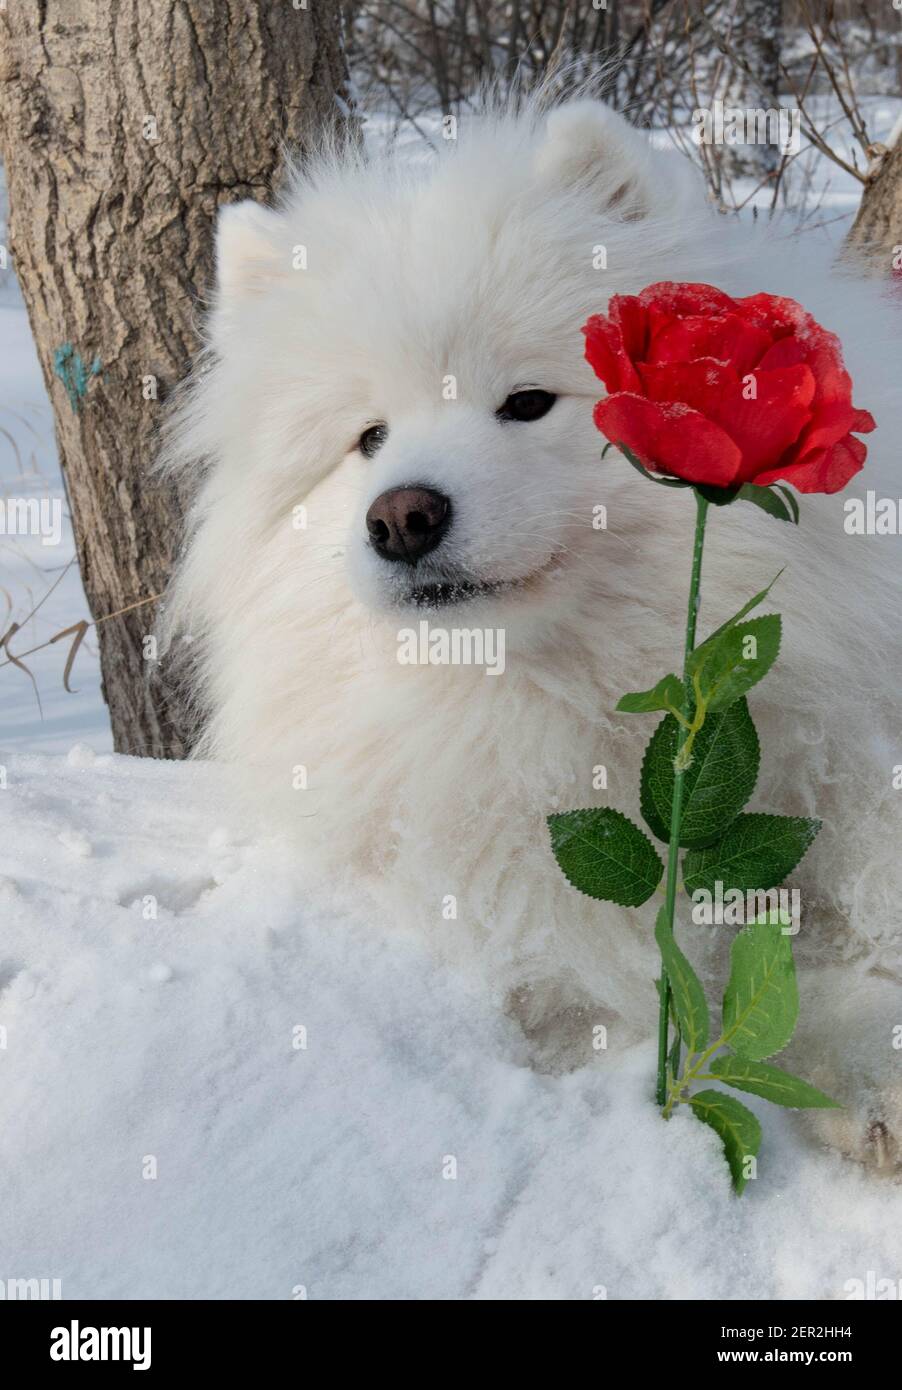 White dog with red rose for International Women's Day Stock Photo